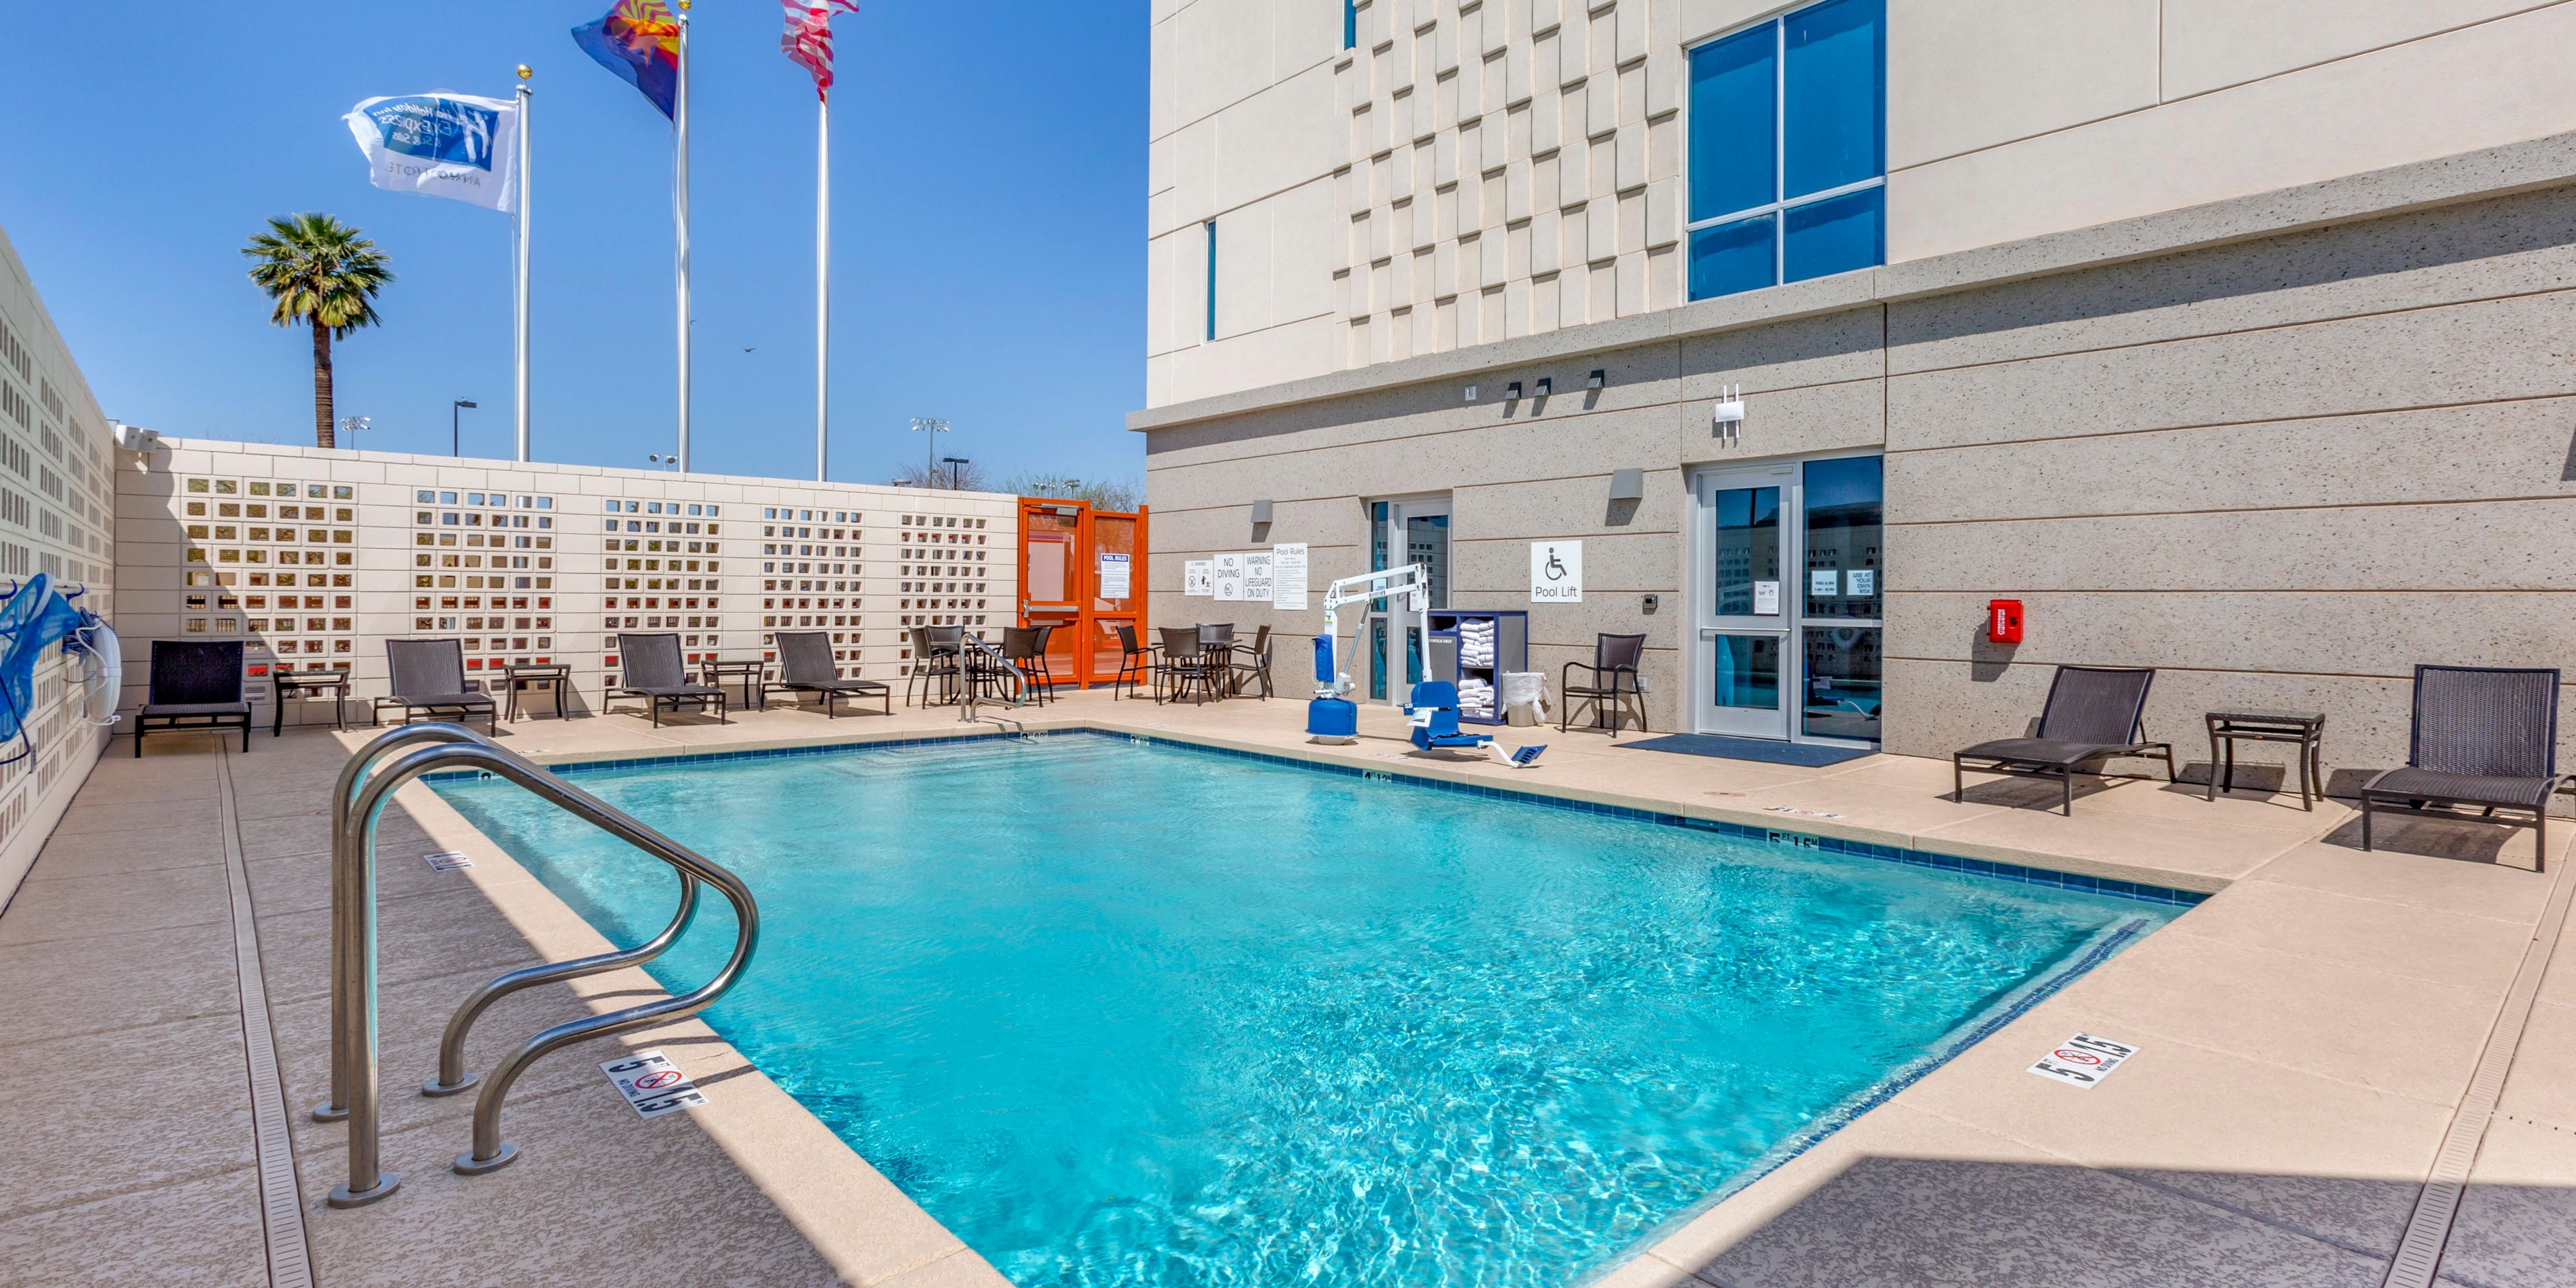 Soak up the sun from any angle, poolside, at Holiday Inn Express and Suites Phoenix Downtown - State Capitol. Let our outdoor pool be your oasis. Book now to take a dip!